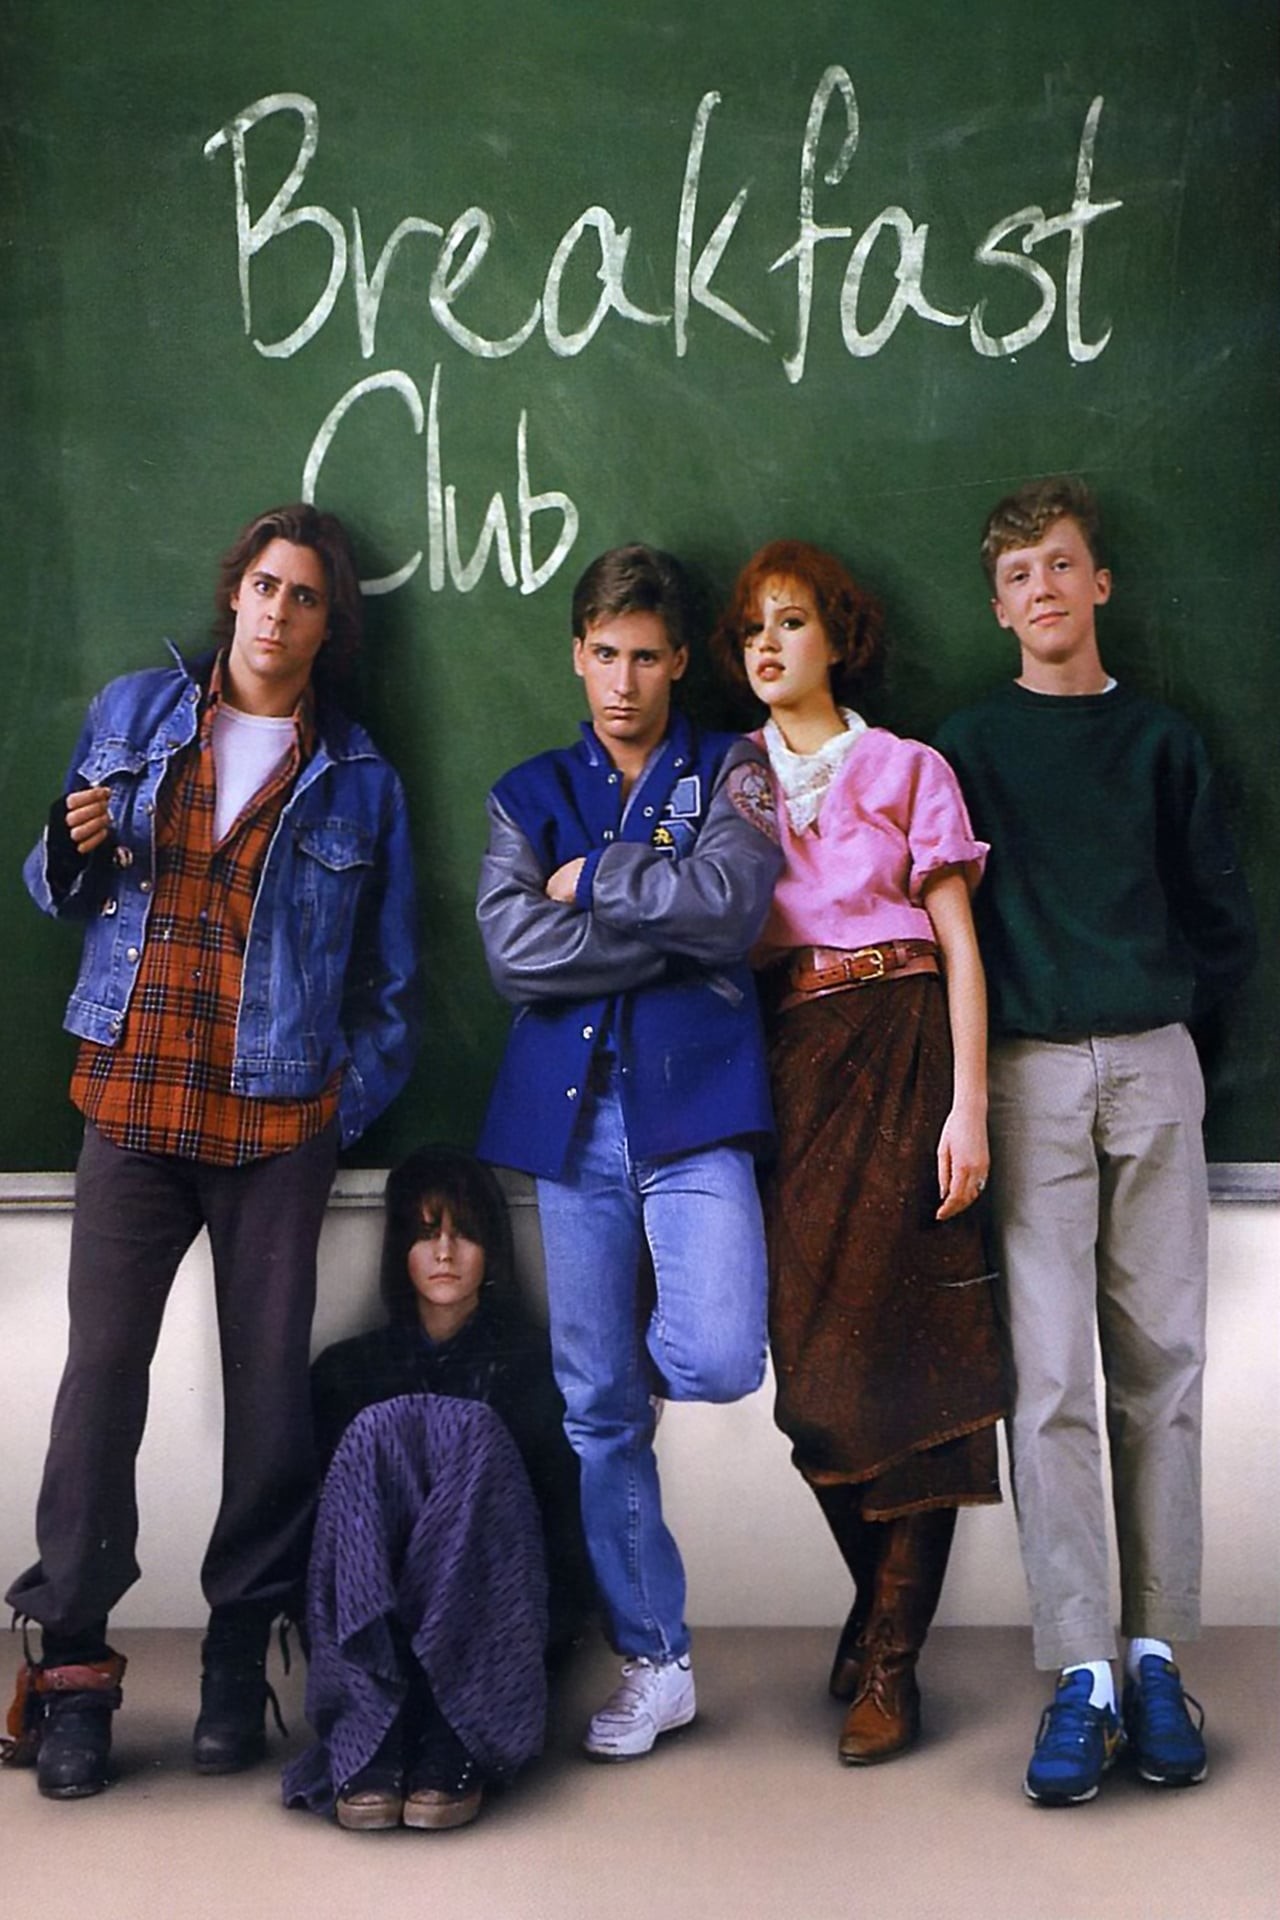 1280x1920 The Breakfast Club Wallpaper For Mobile